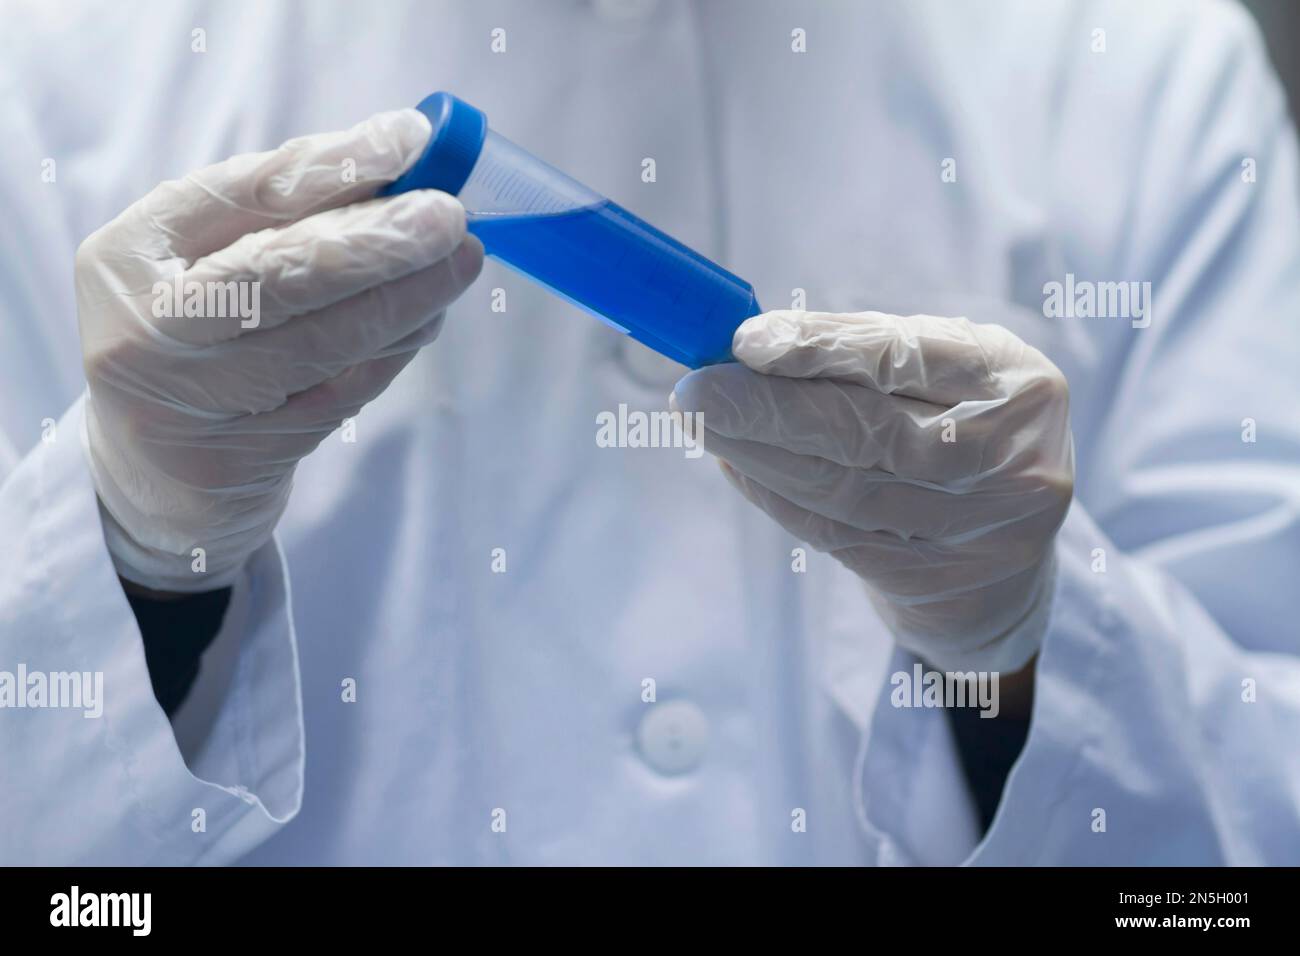 Mid section of a female scientist examining test tube in a laboratory, Freiburg im Breisgau, Baden-Württemberg, Germany Stock Photo